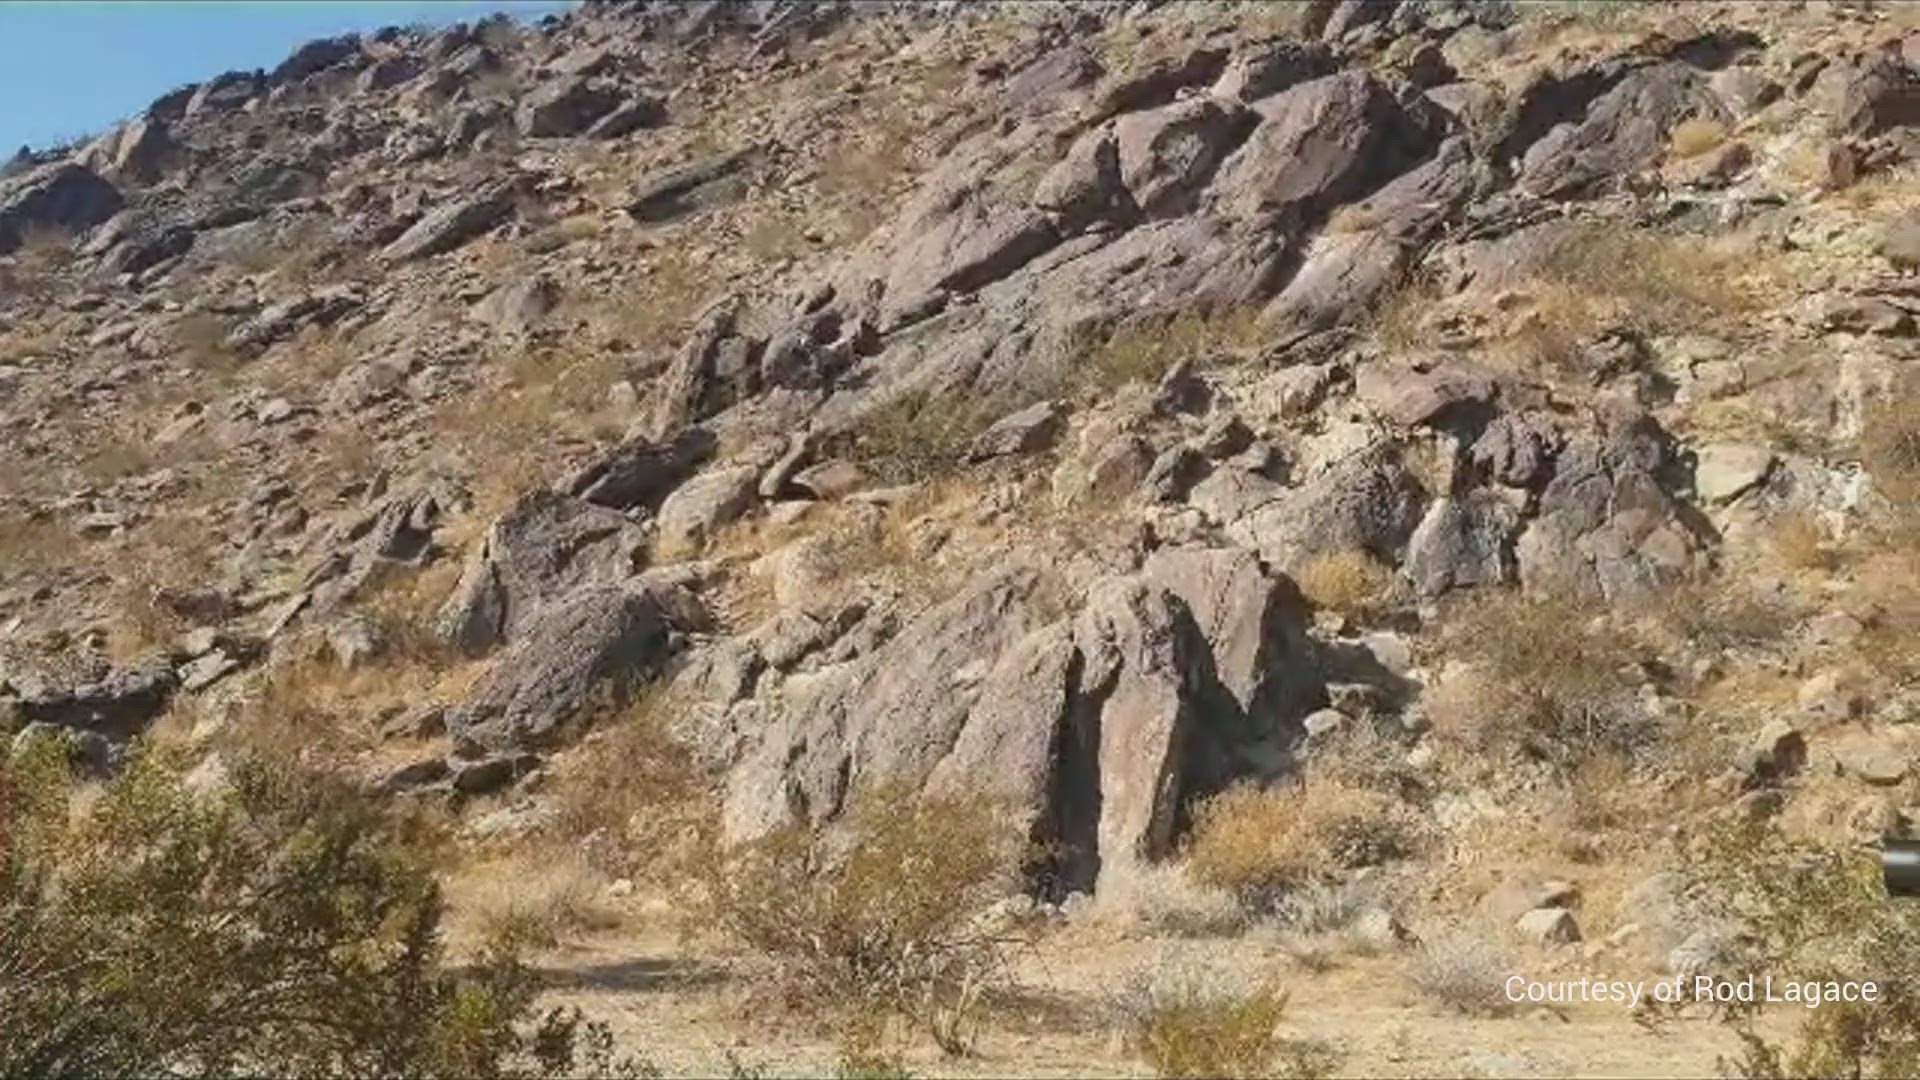 A man in the Palm Canyon area near Anza Borrego State Park captured stunning video of several bighorn sheep coming down from the mountains and sent them to News 8.